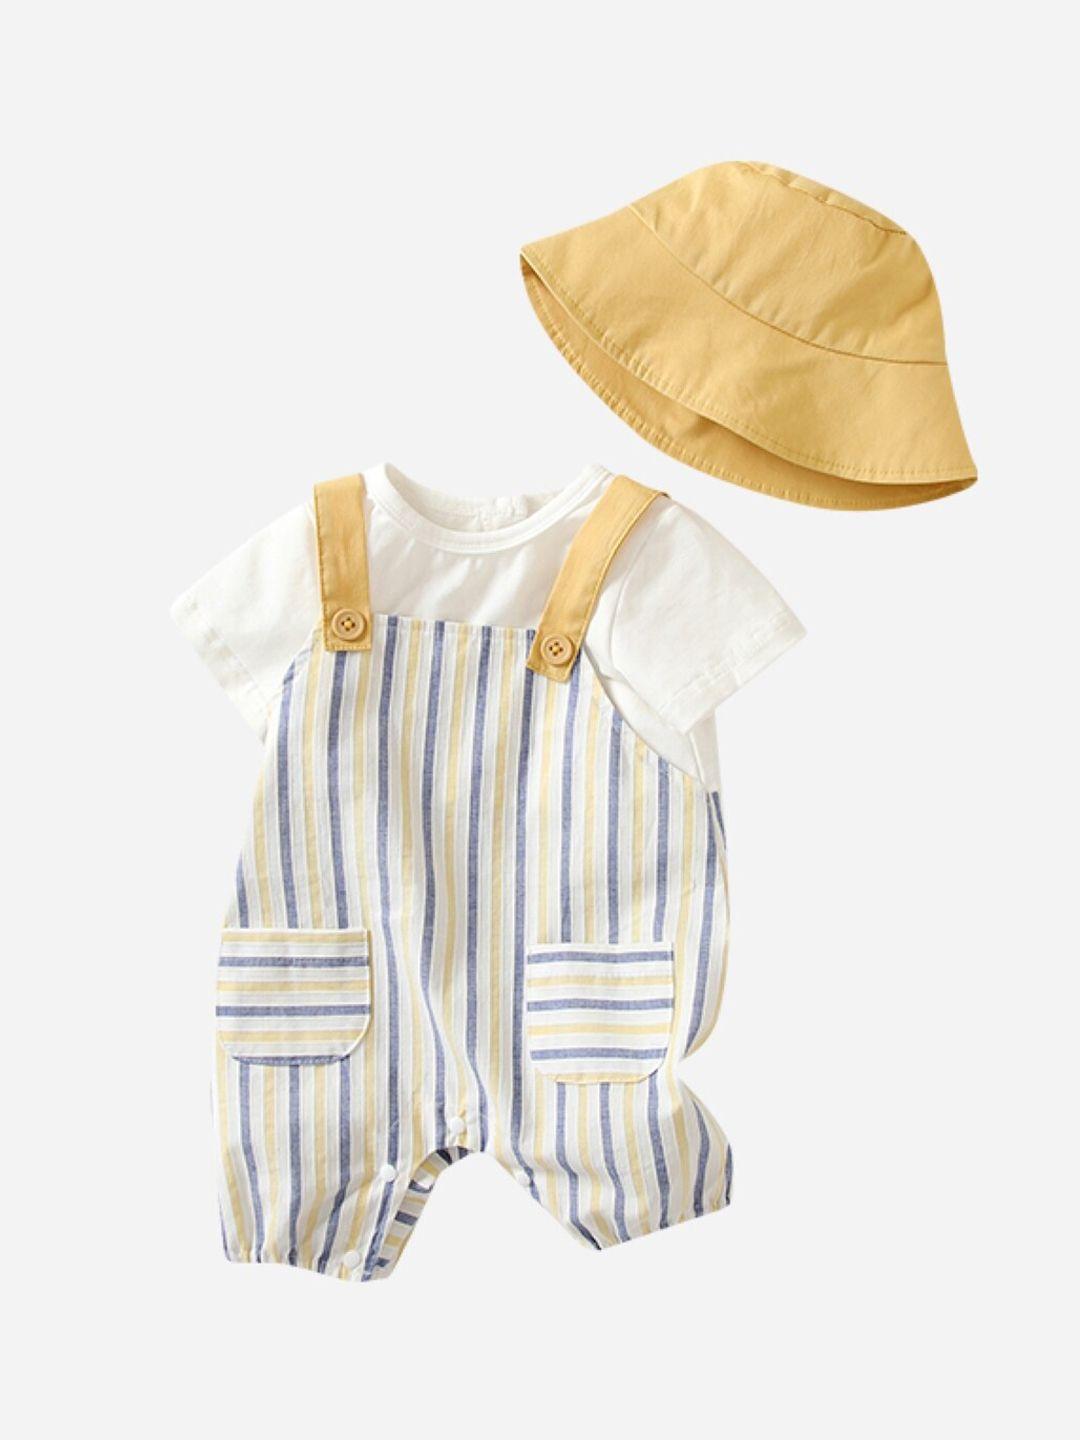 stylecast-infants-yellow-&-white-striped-pure-cotton-romper